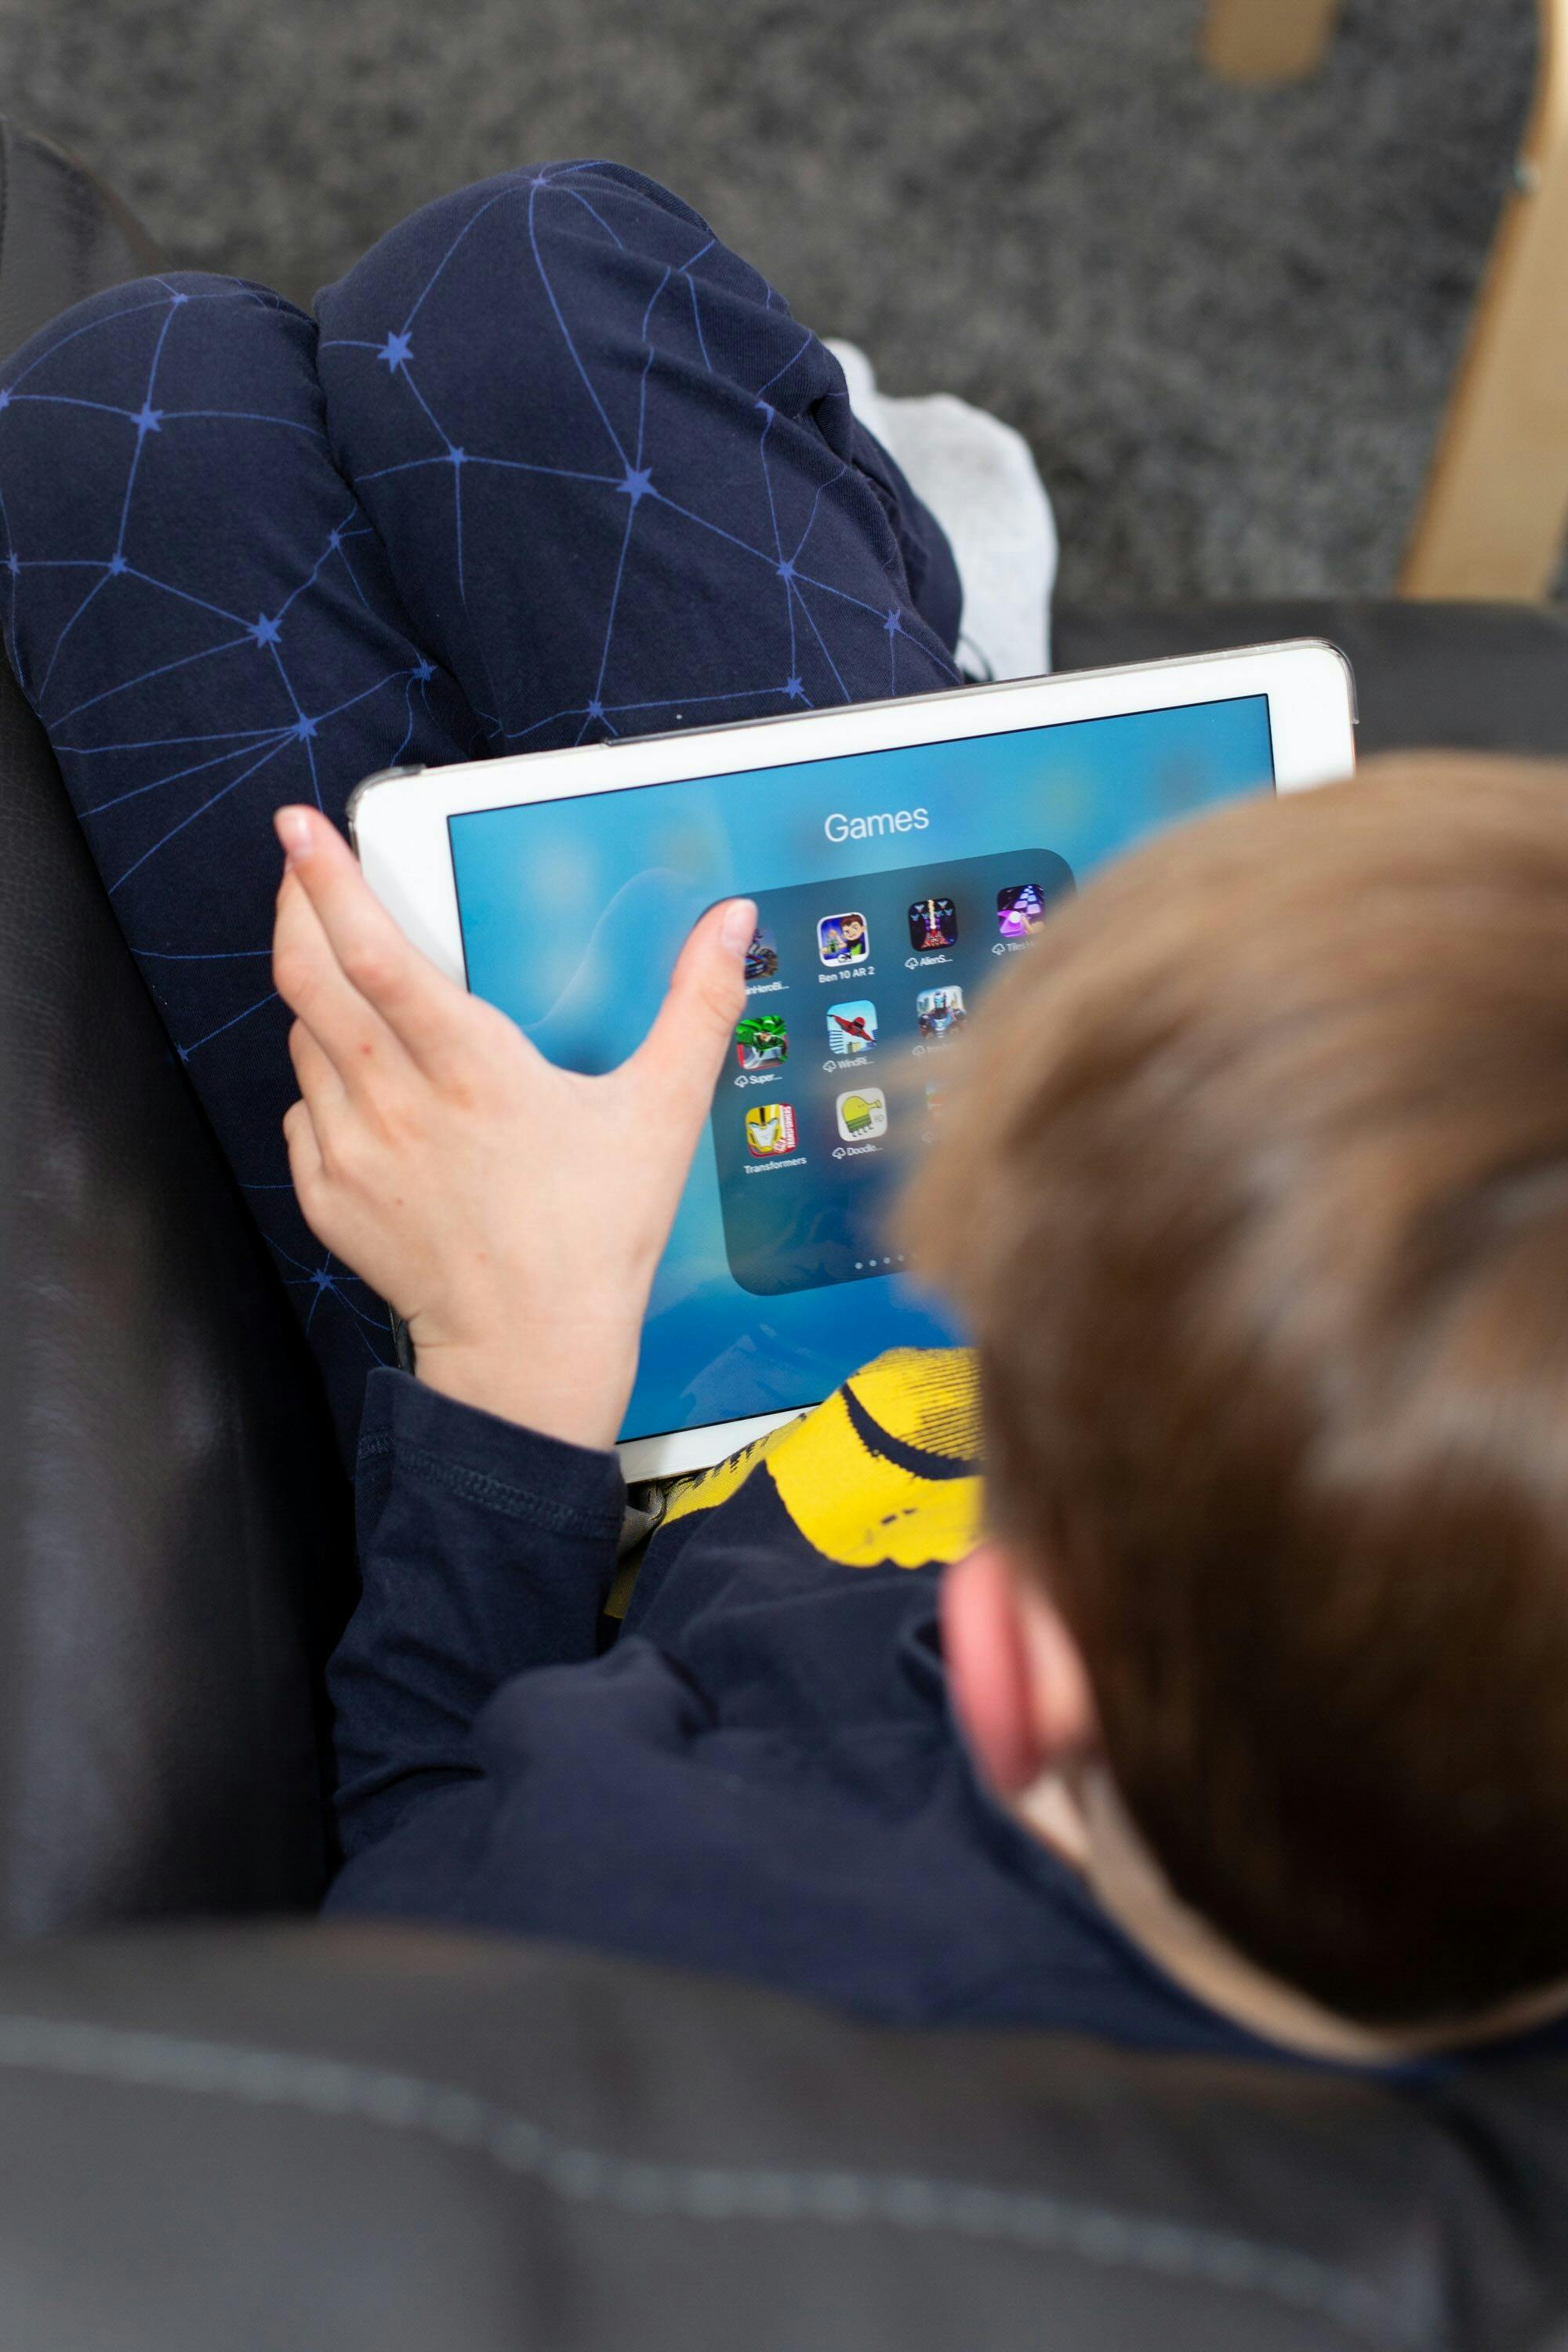 Young child sitting with tablet. He is looking at a menu of games to play.